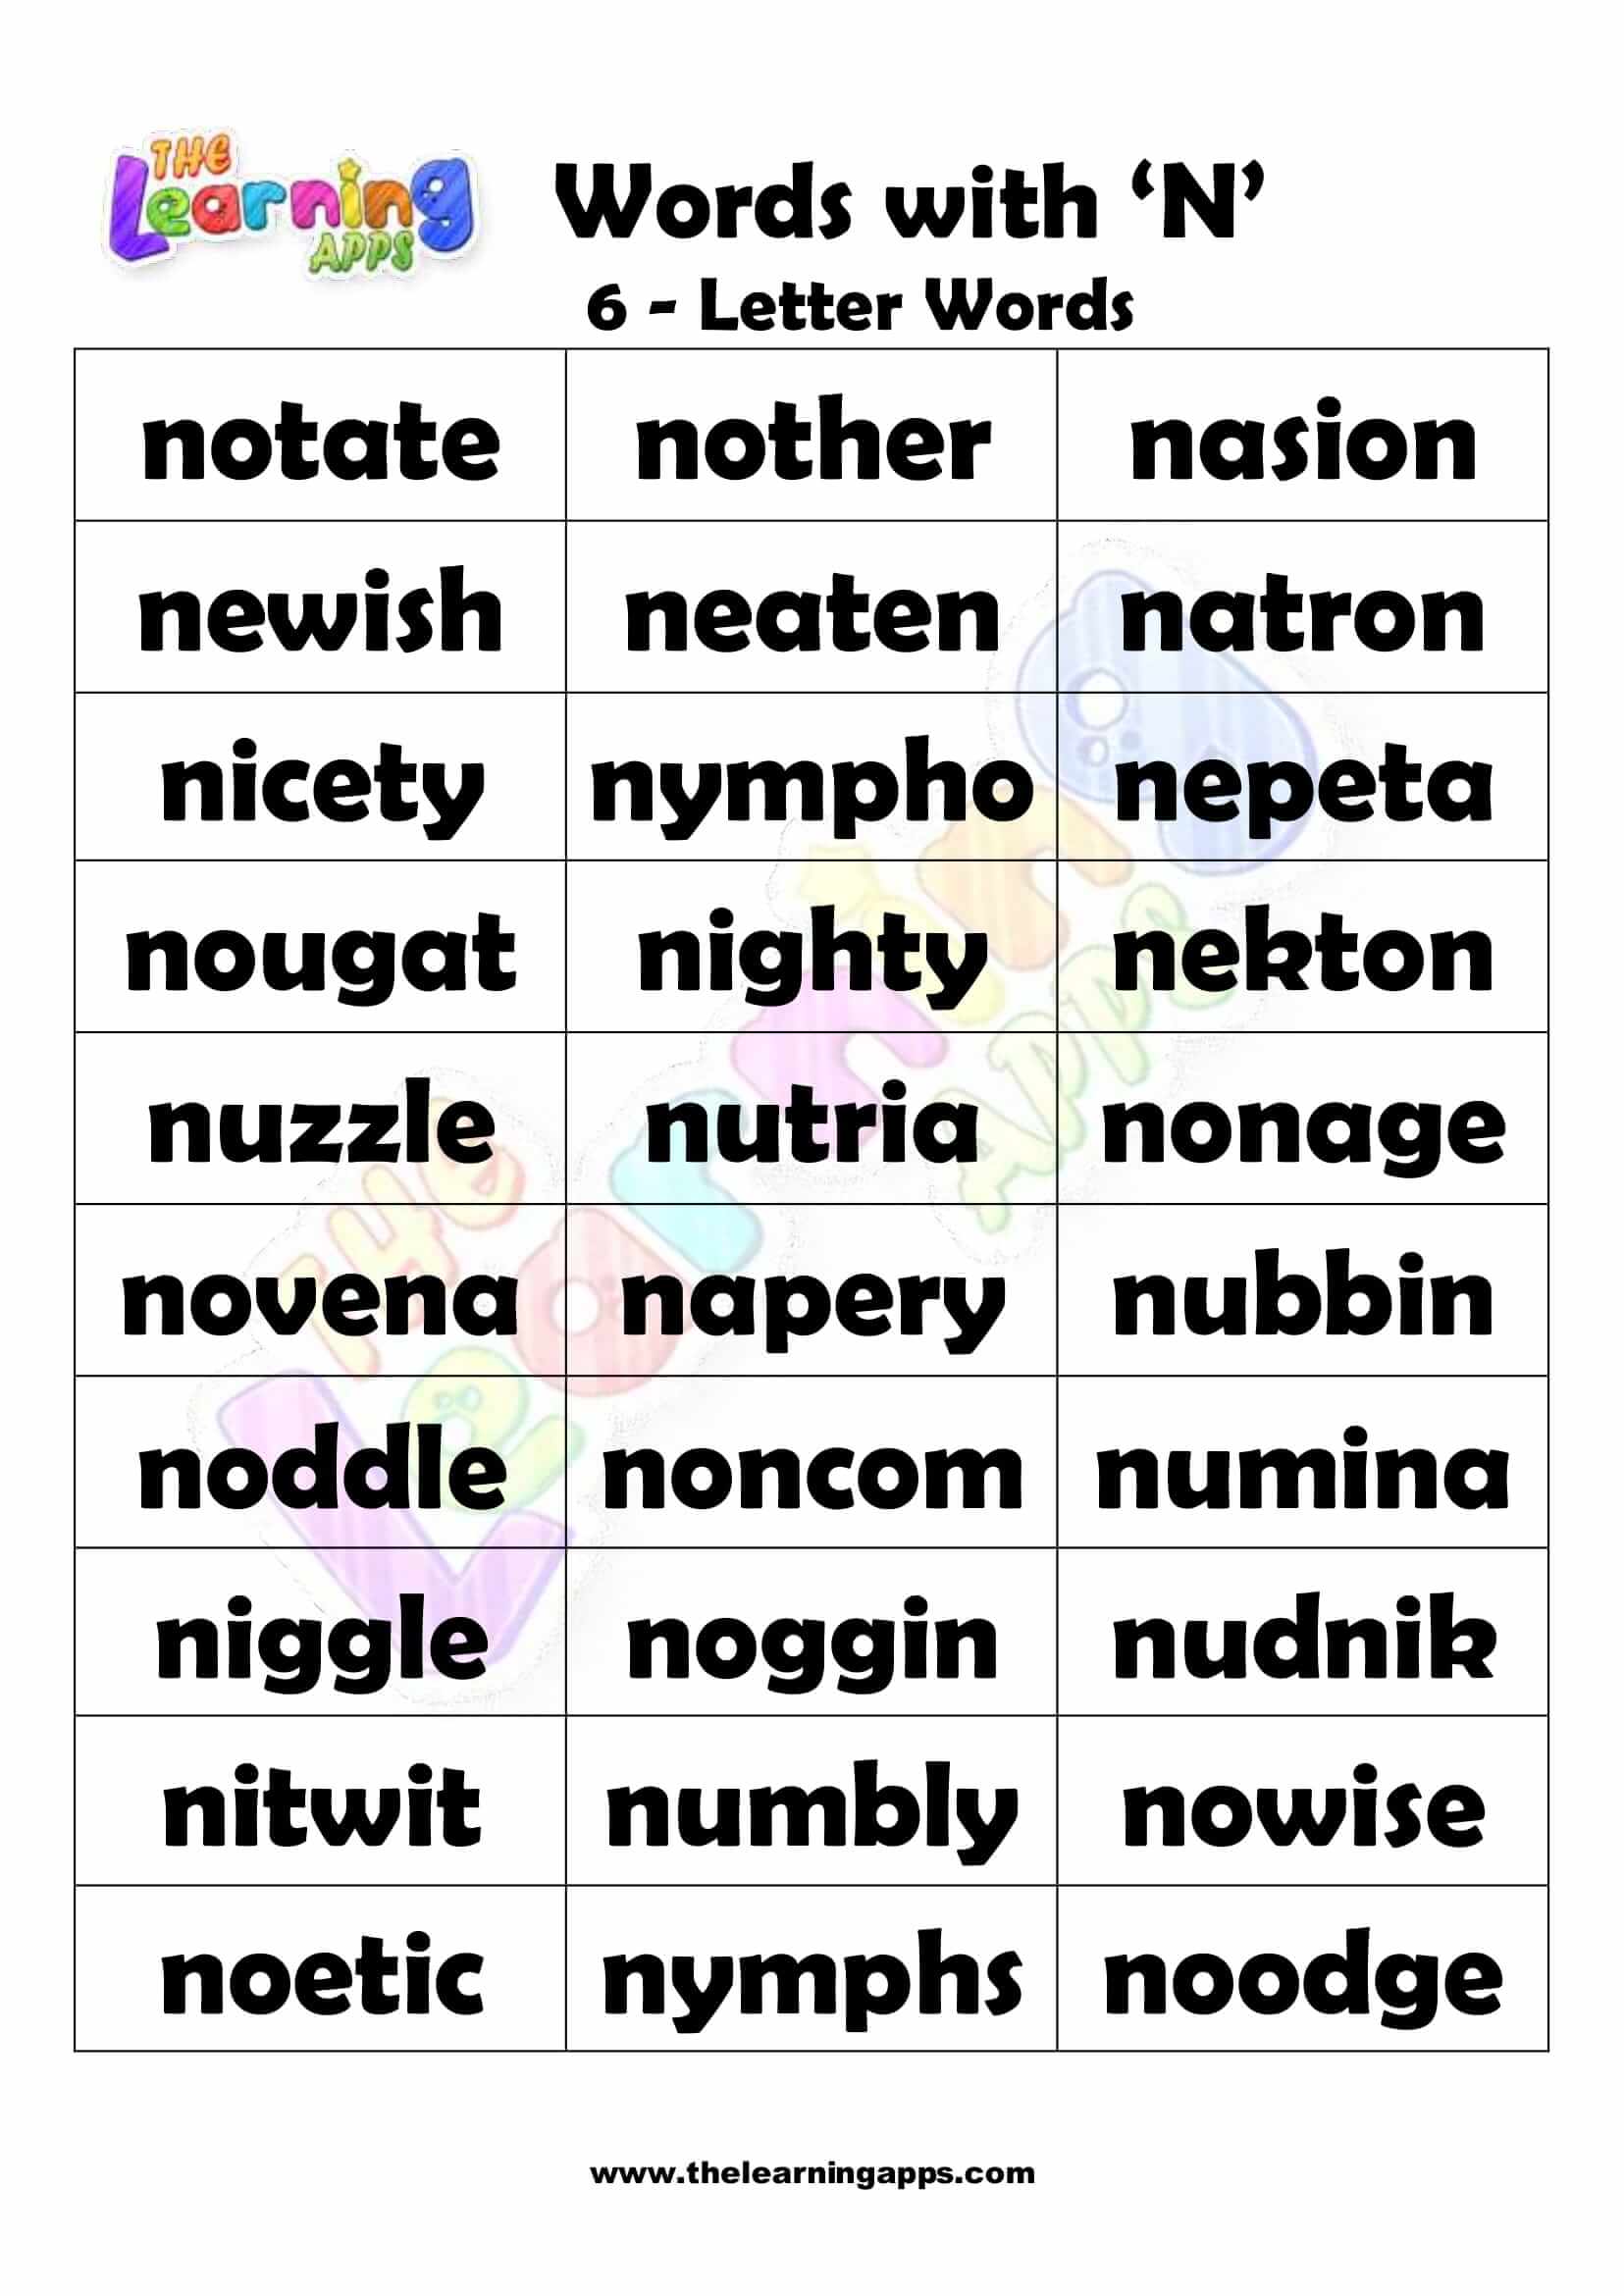 6 LETTER WORD STARTING WITH N-3